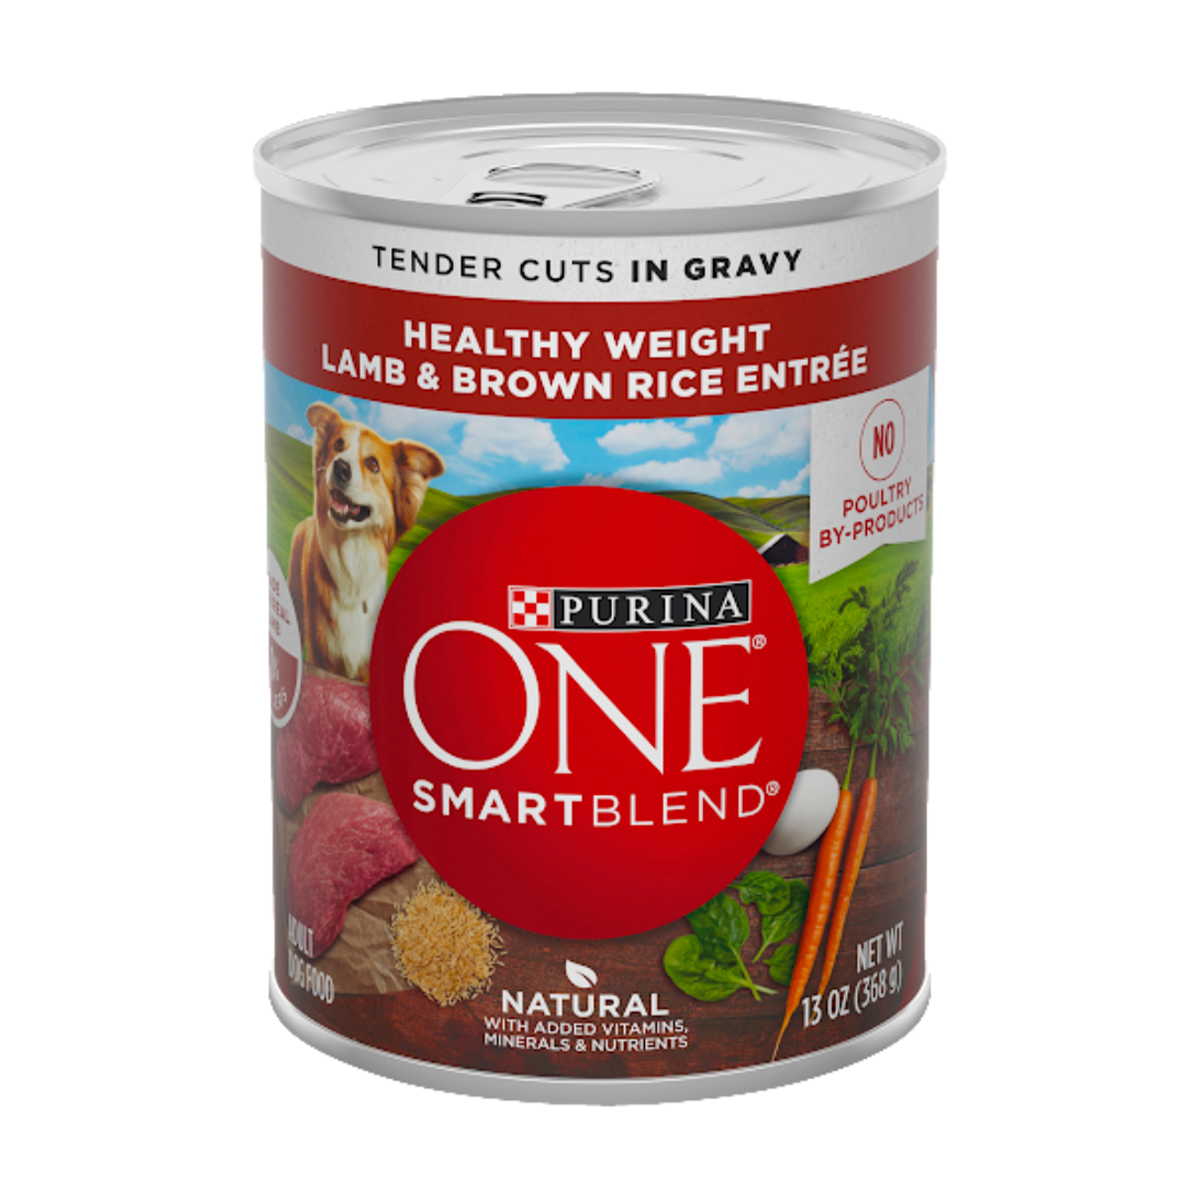 purina-one-wet-healthy-wight-lamb-%26-rice-brown-entr%C3%A9e-tender-cuts-in-gravy.png